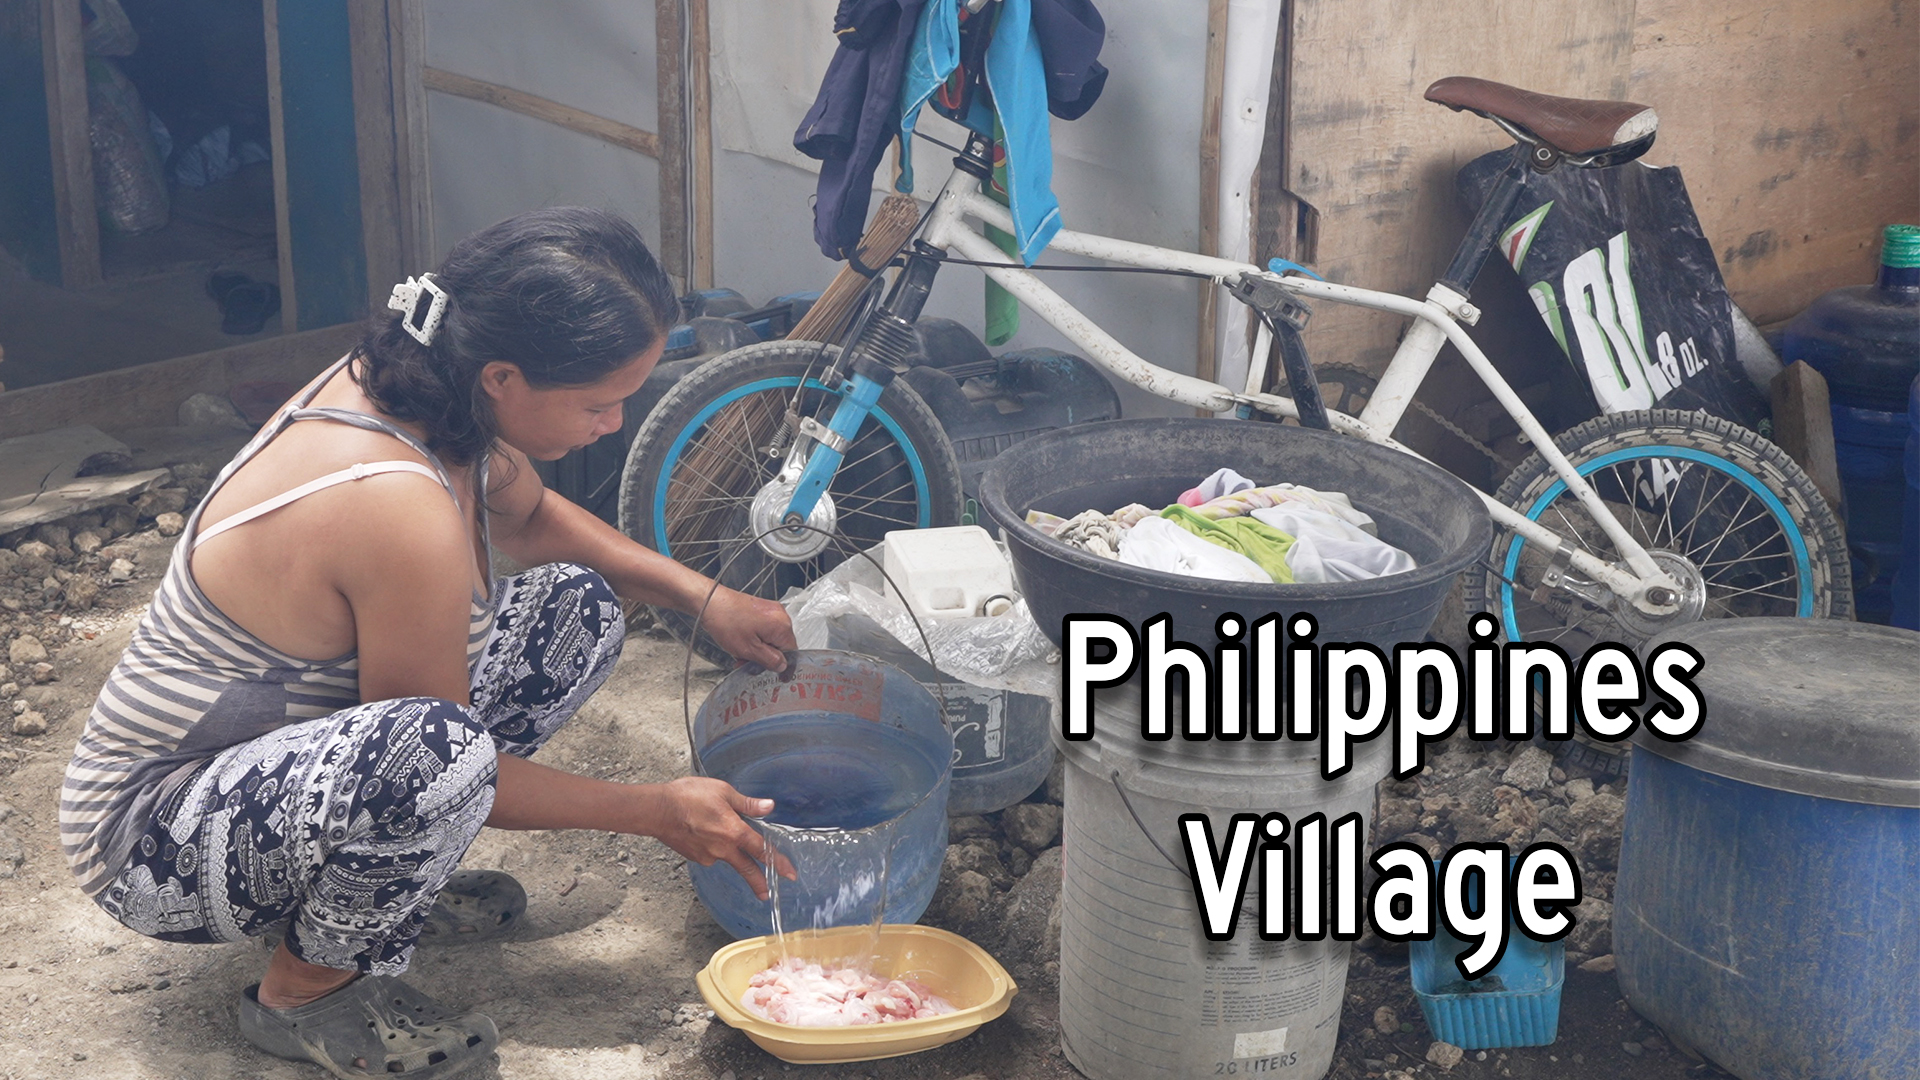 Philippines Village Family Day - Cleaning Fish, Squatters in the Tent ...